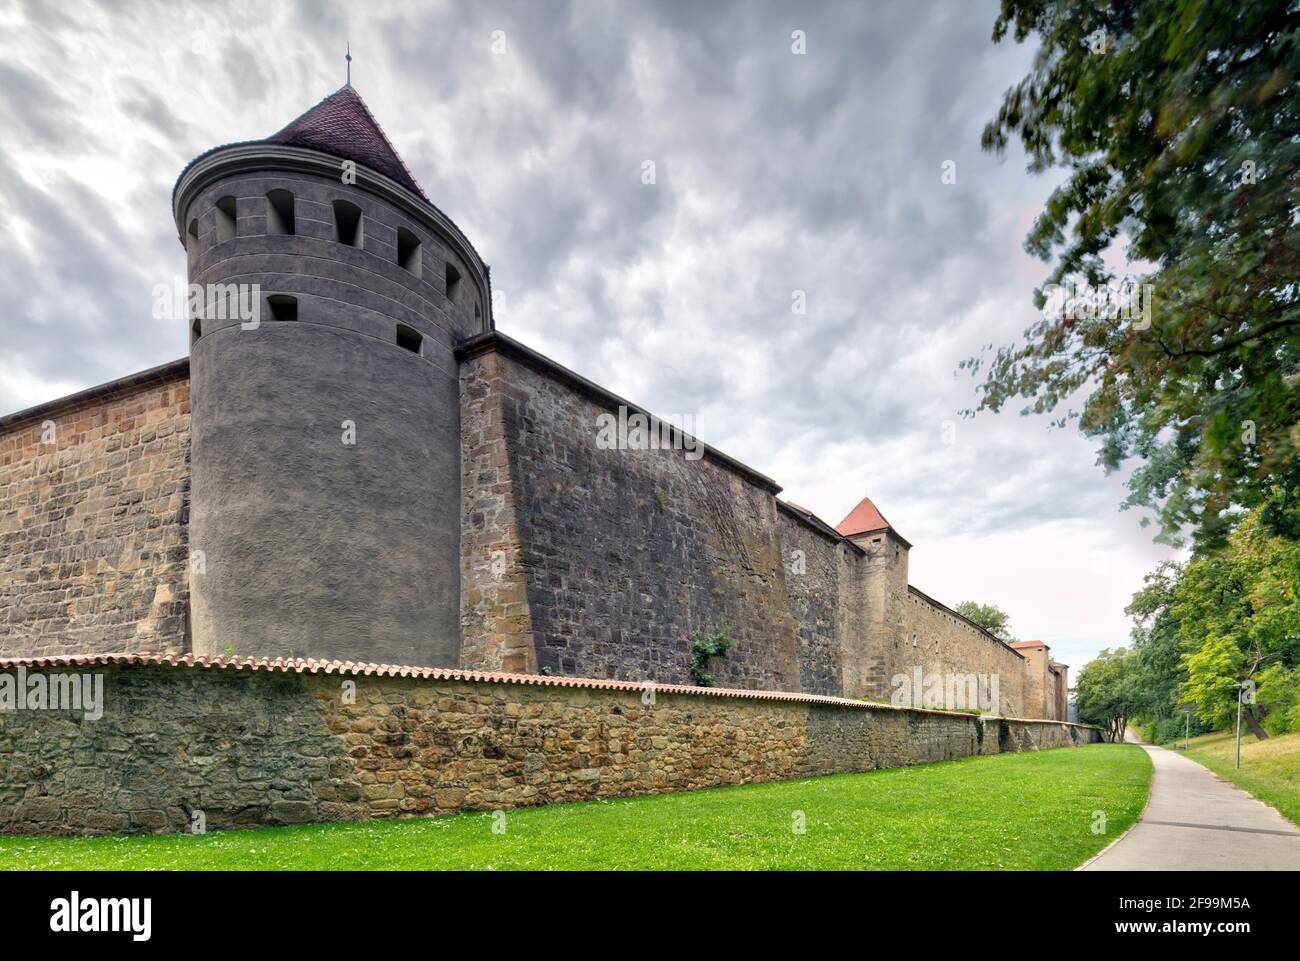 Defensive wall, defense towers, city wall, city fortifications, green area, Amberg, Upper Palatinate, Bavaria, Germany, Europe Stock Photo